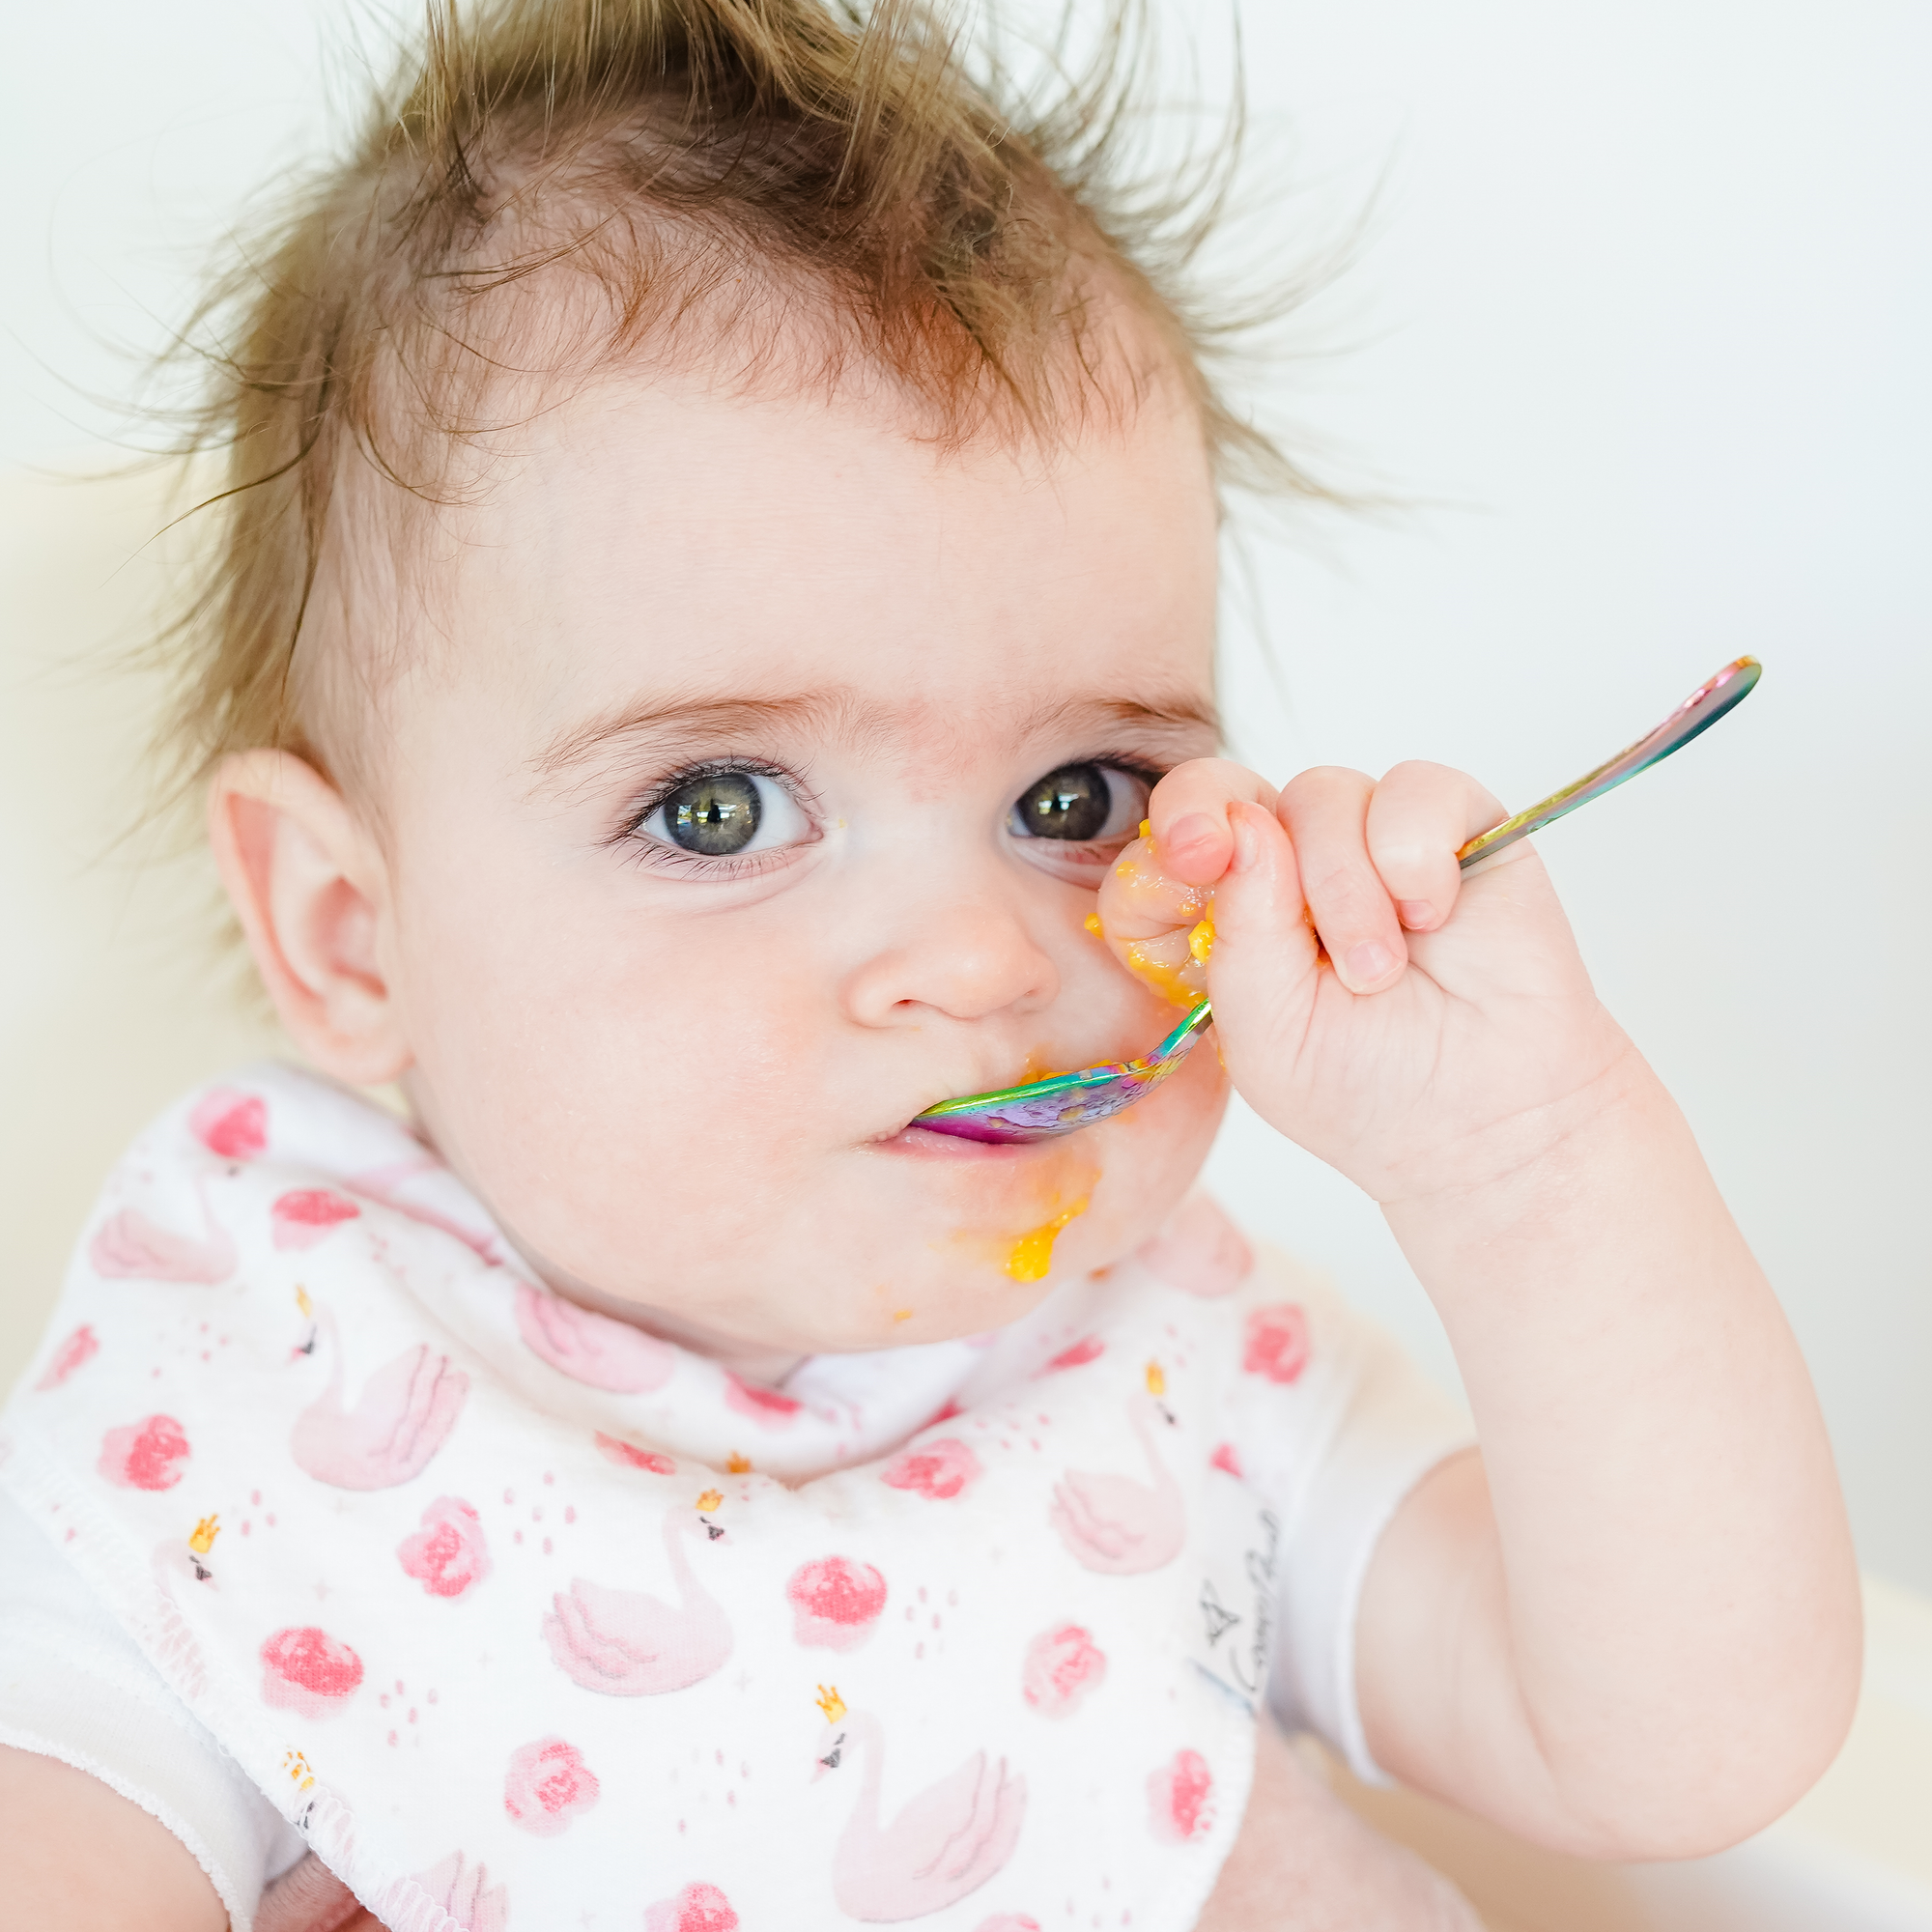 Baby using the starting solids set infant spoon to feed herself, set can be used for traditional feeding or baby led weaning